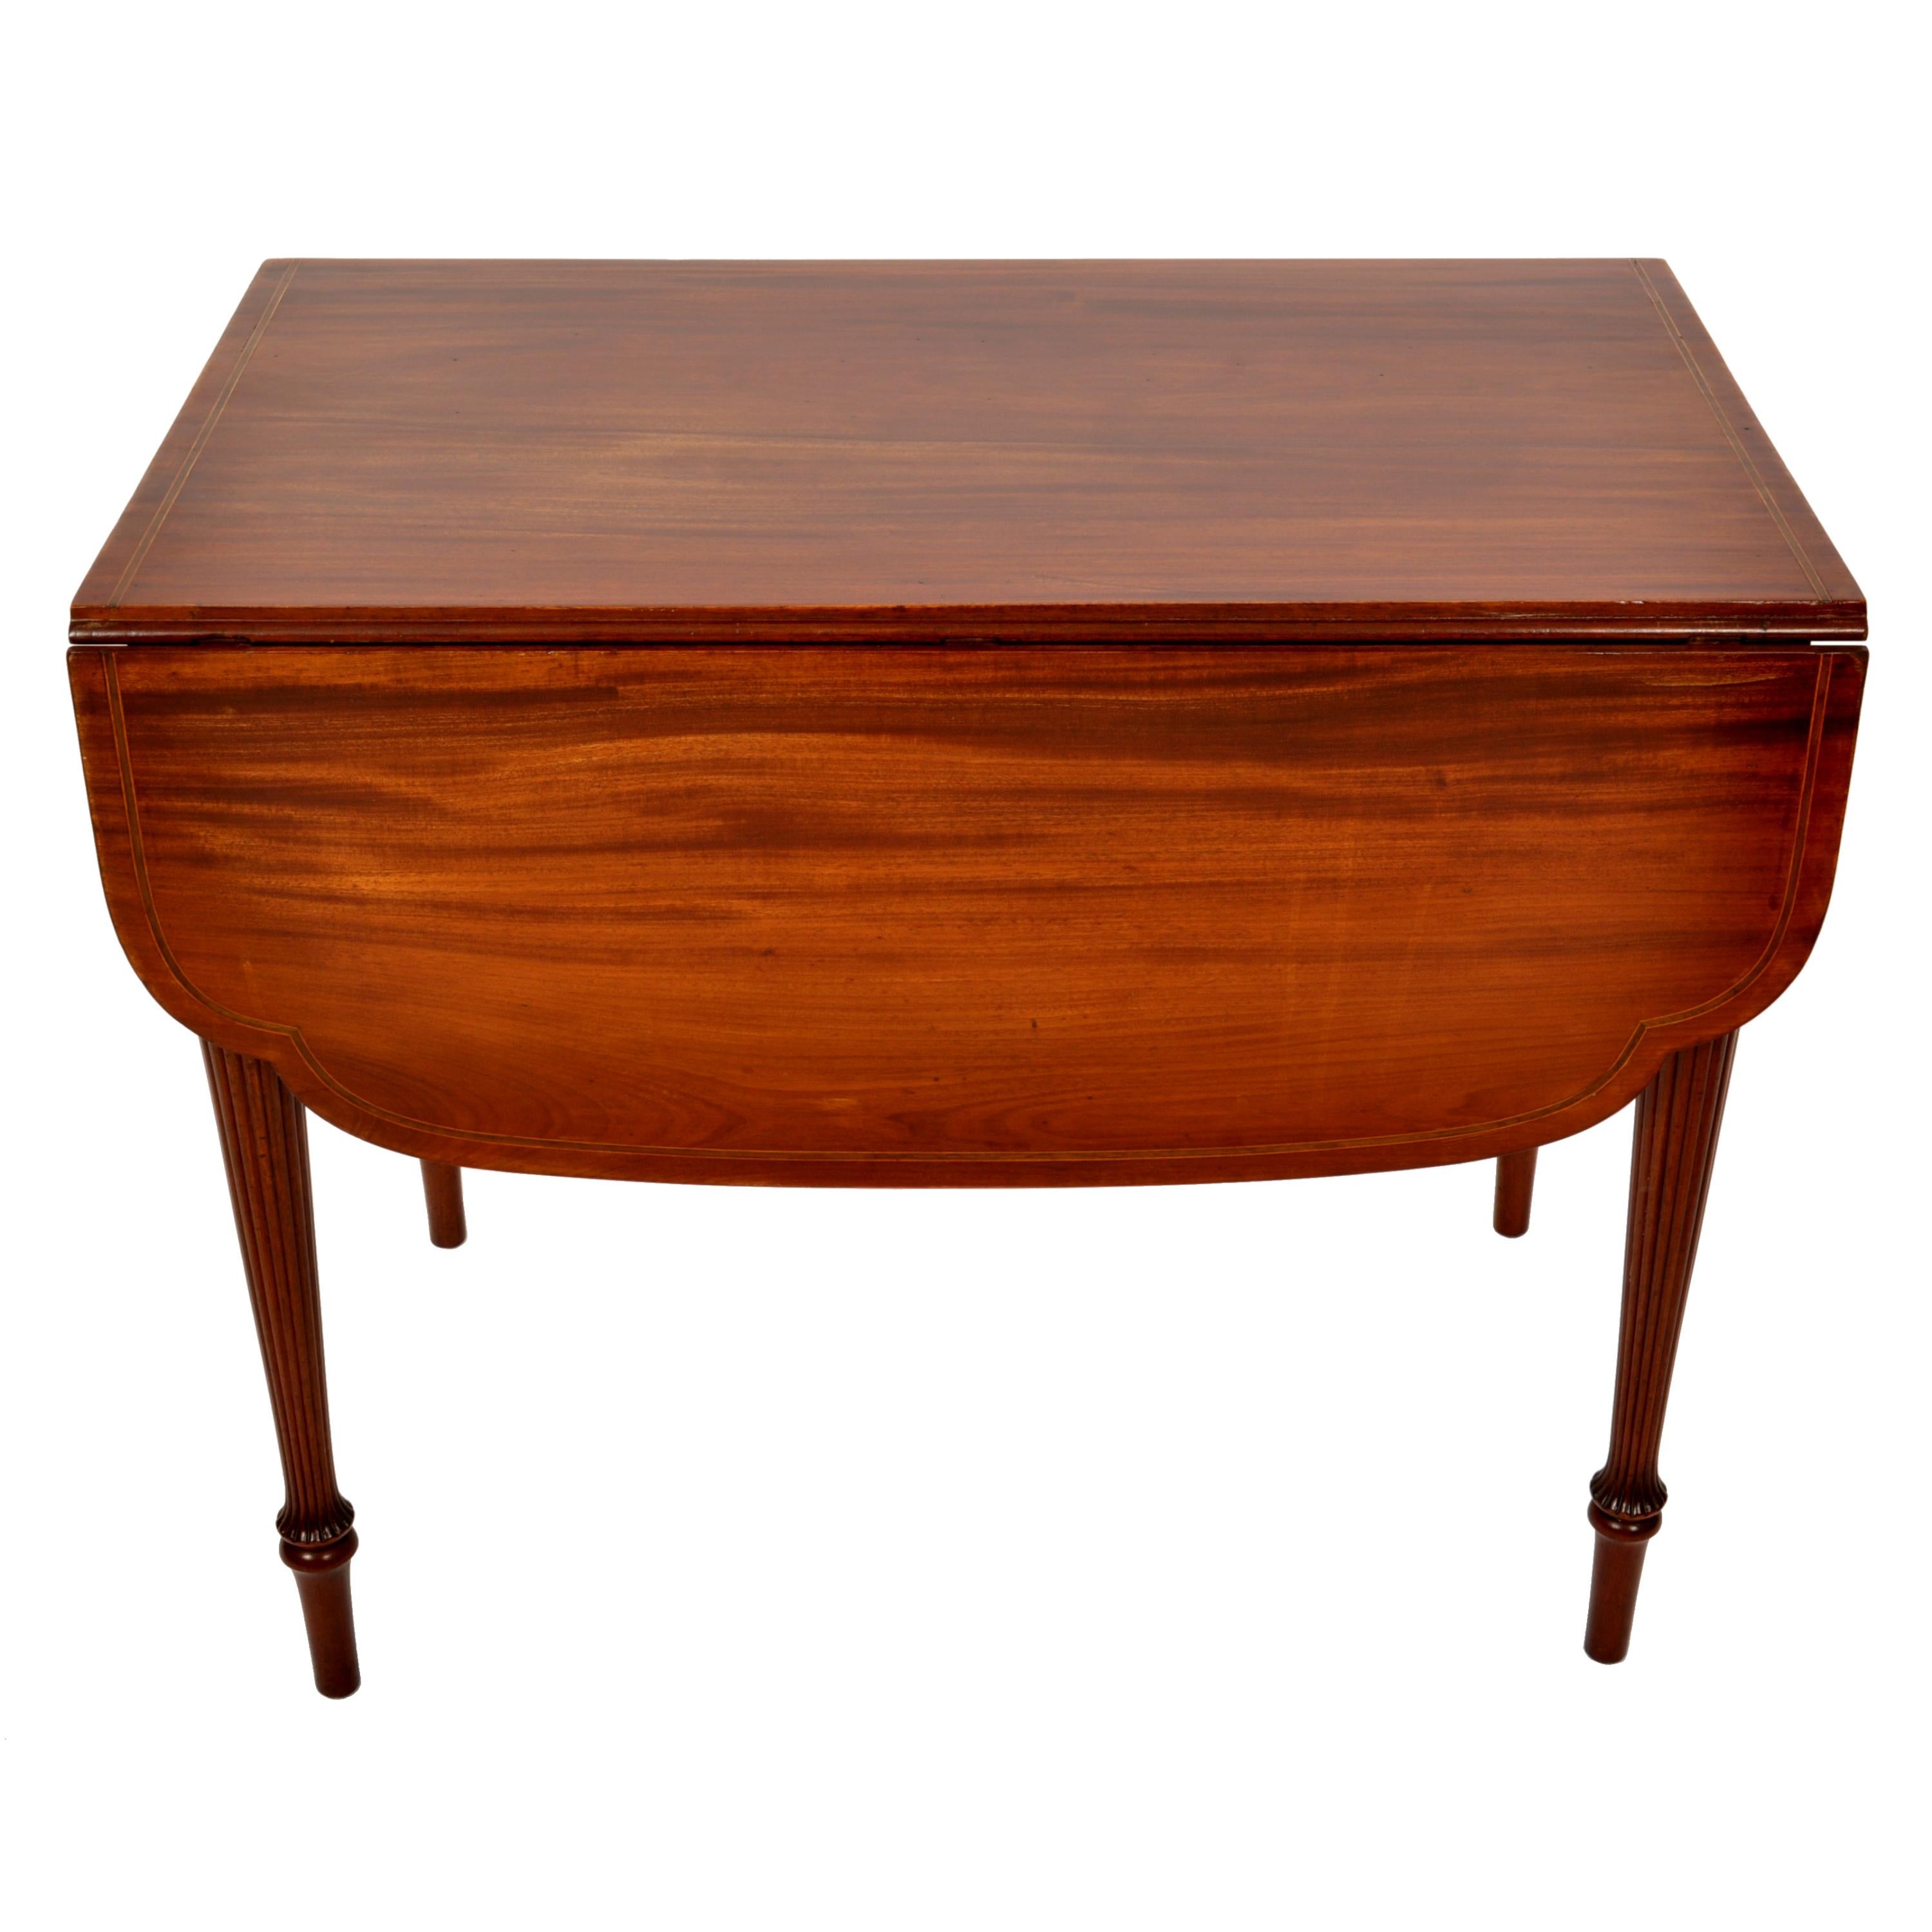 Late 18th Century Antique American Federal Sheraton Inlaid Mahogany Pembroke Table New York 1790 For Sale